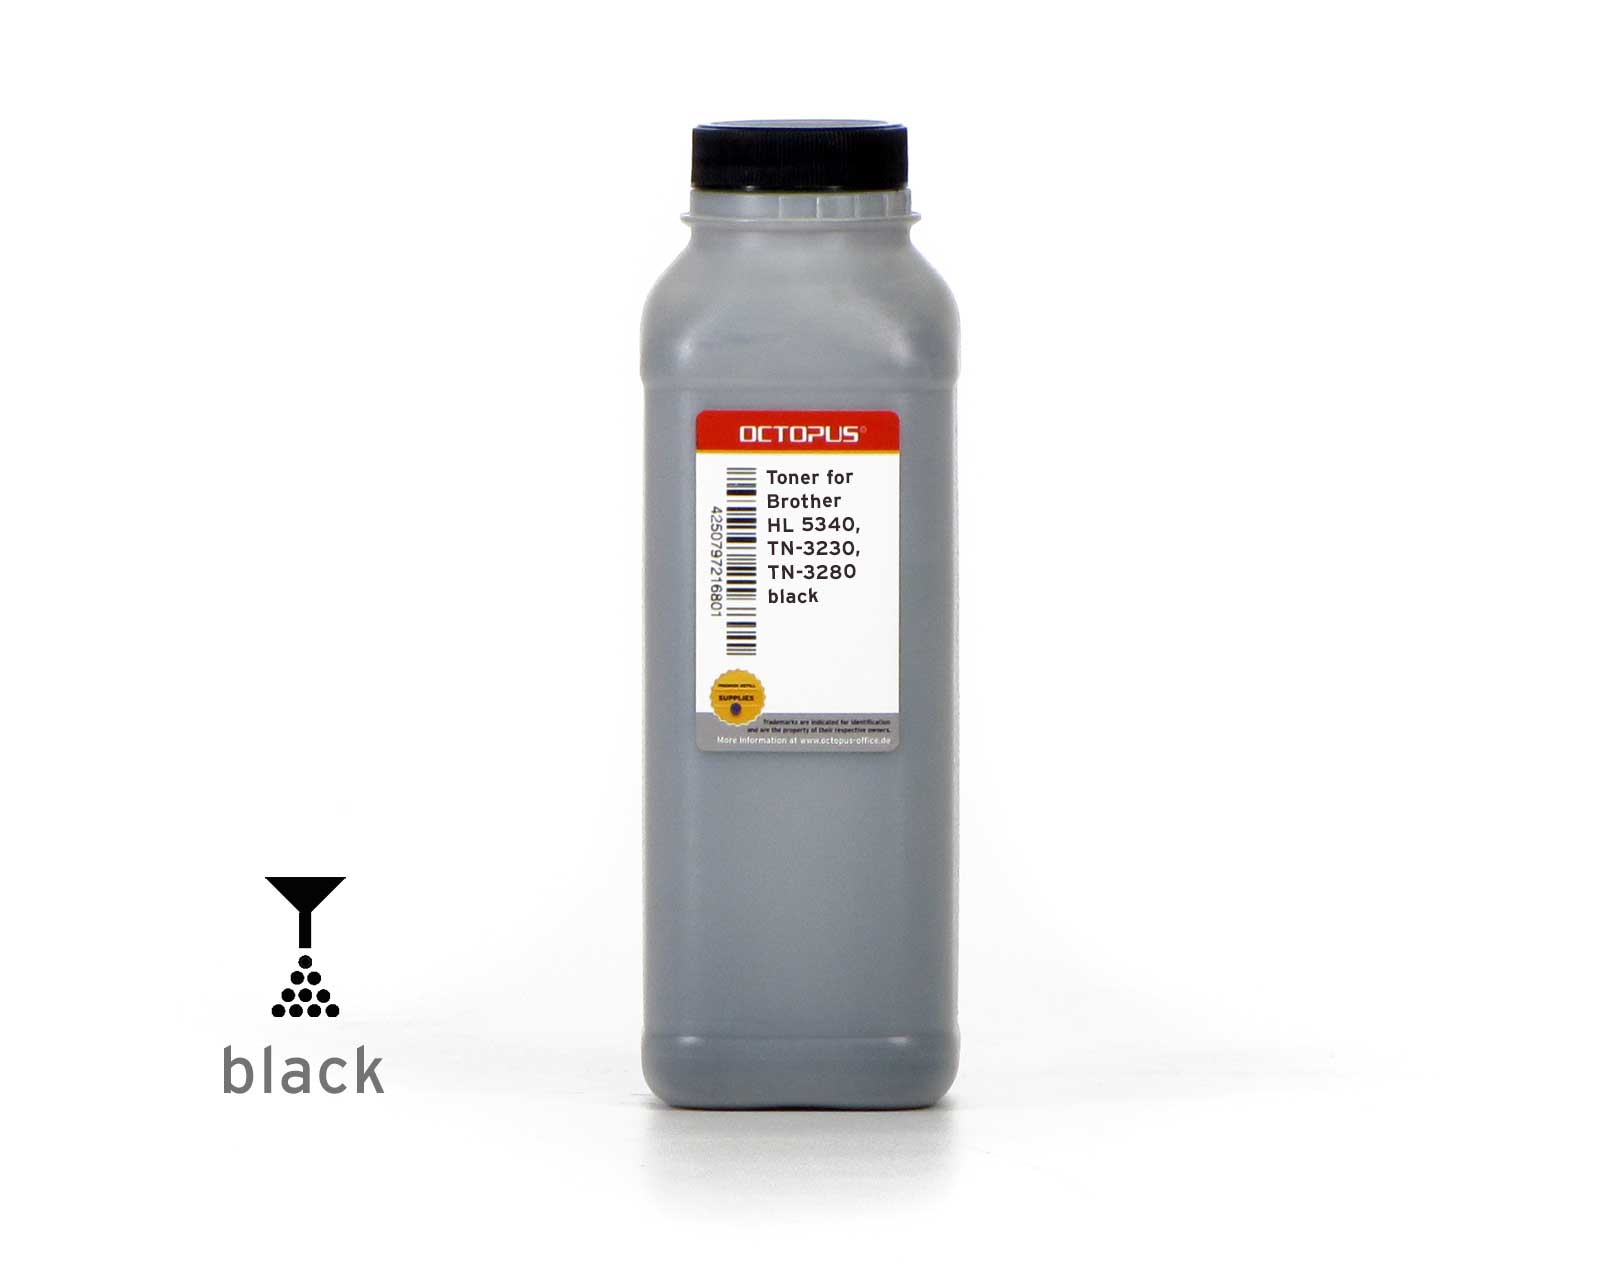 Toner powder compatible with Brother HL 5340, TN-3230, 3280 black